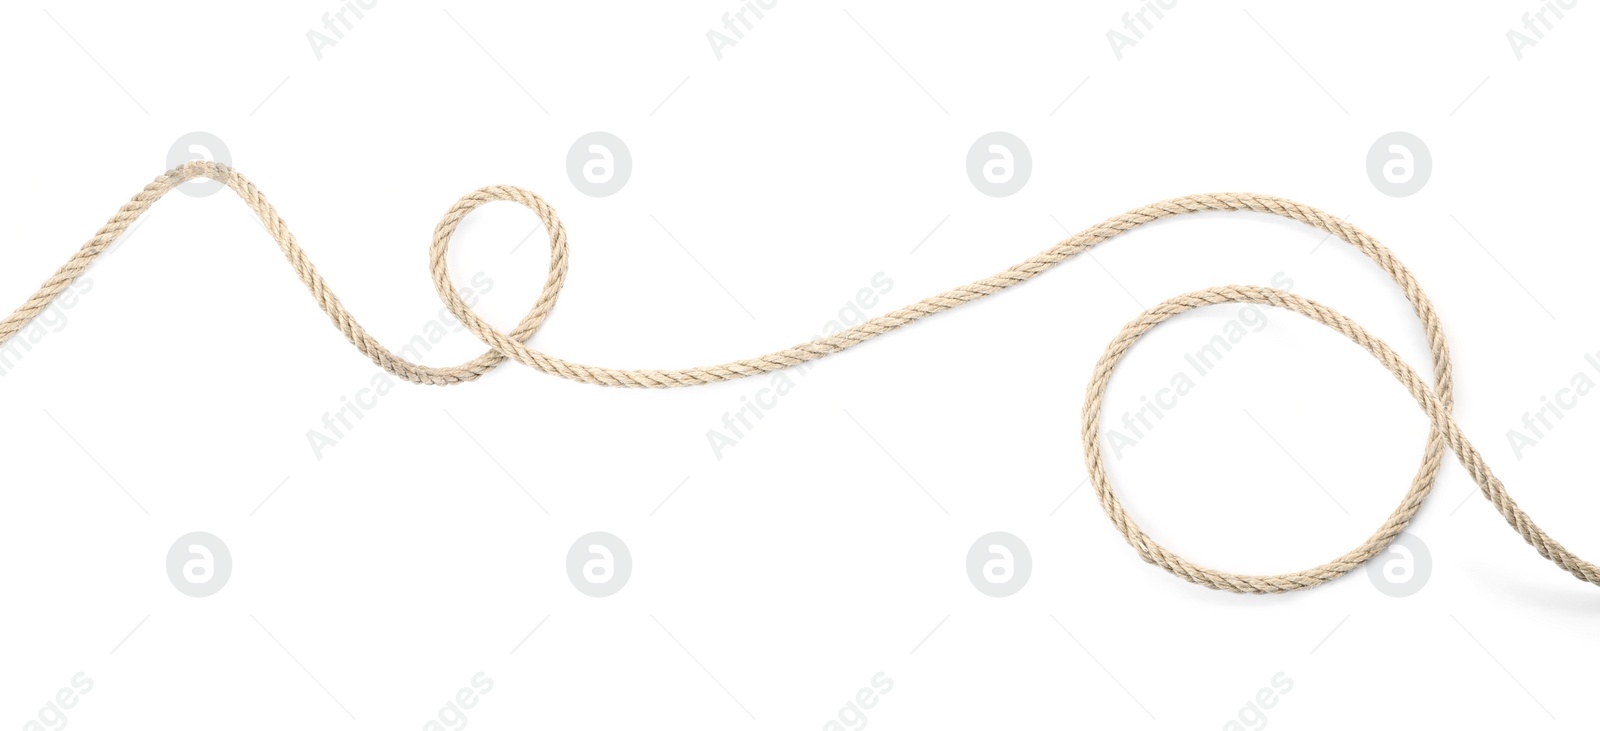 Photo of Hemp rope isolated on white, top view